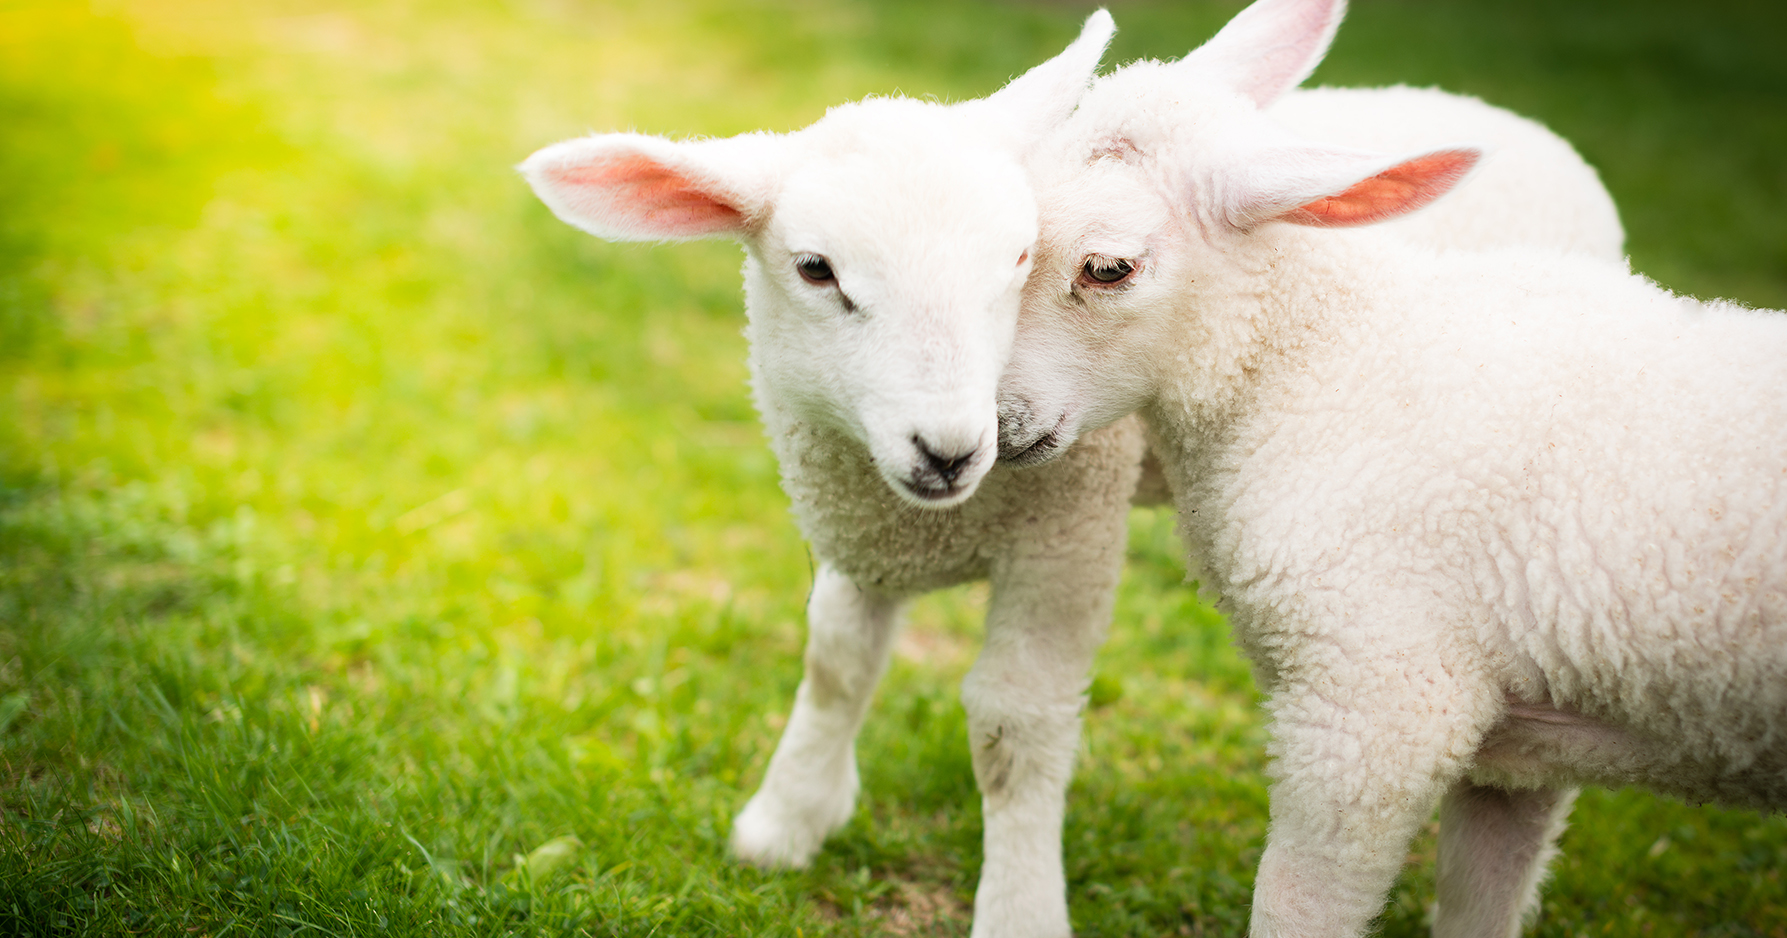 uk-considers-animal-testing-while-china-considers-banning-it-lambs-playing